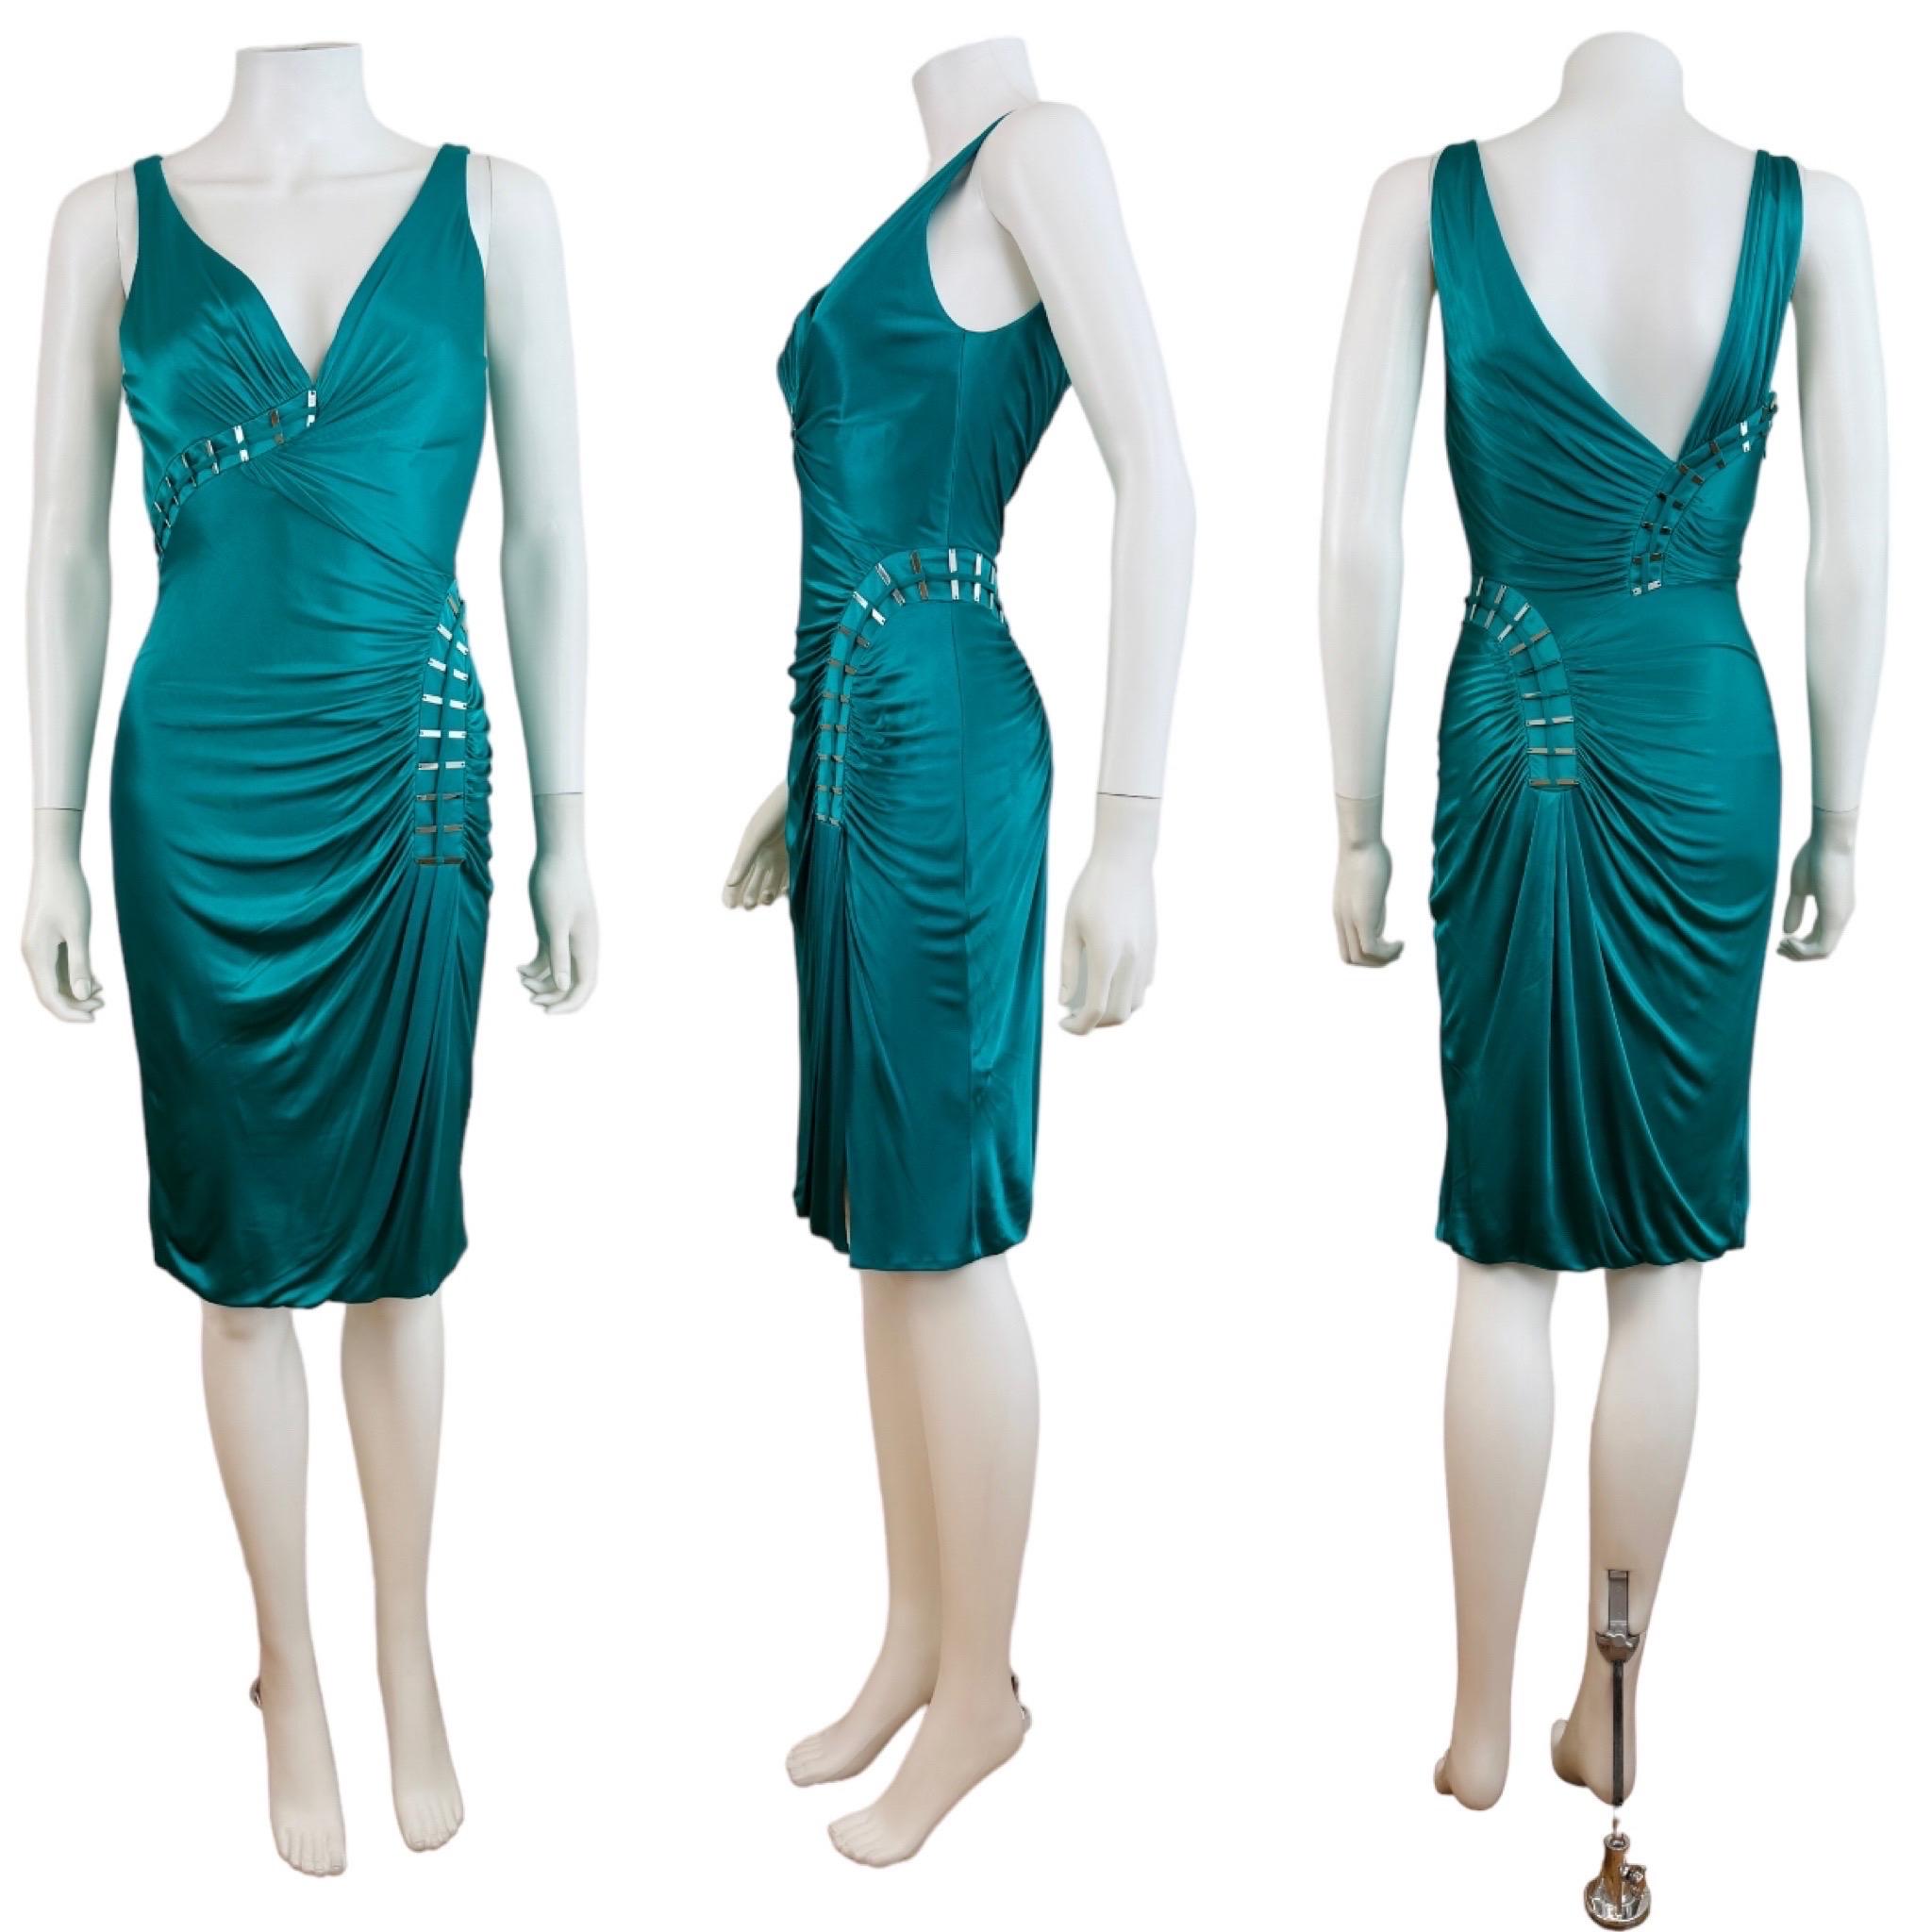 F/W 2009 Versace Dress
Emerald green slinky fabric with draped details throughout
Deep V neckline with gathered details at the bust + Versace stamped silver embelishments
Fitted wiggle style
Gathered details at the left hip w/Versace stamped silver